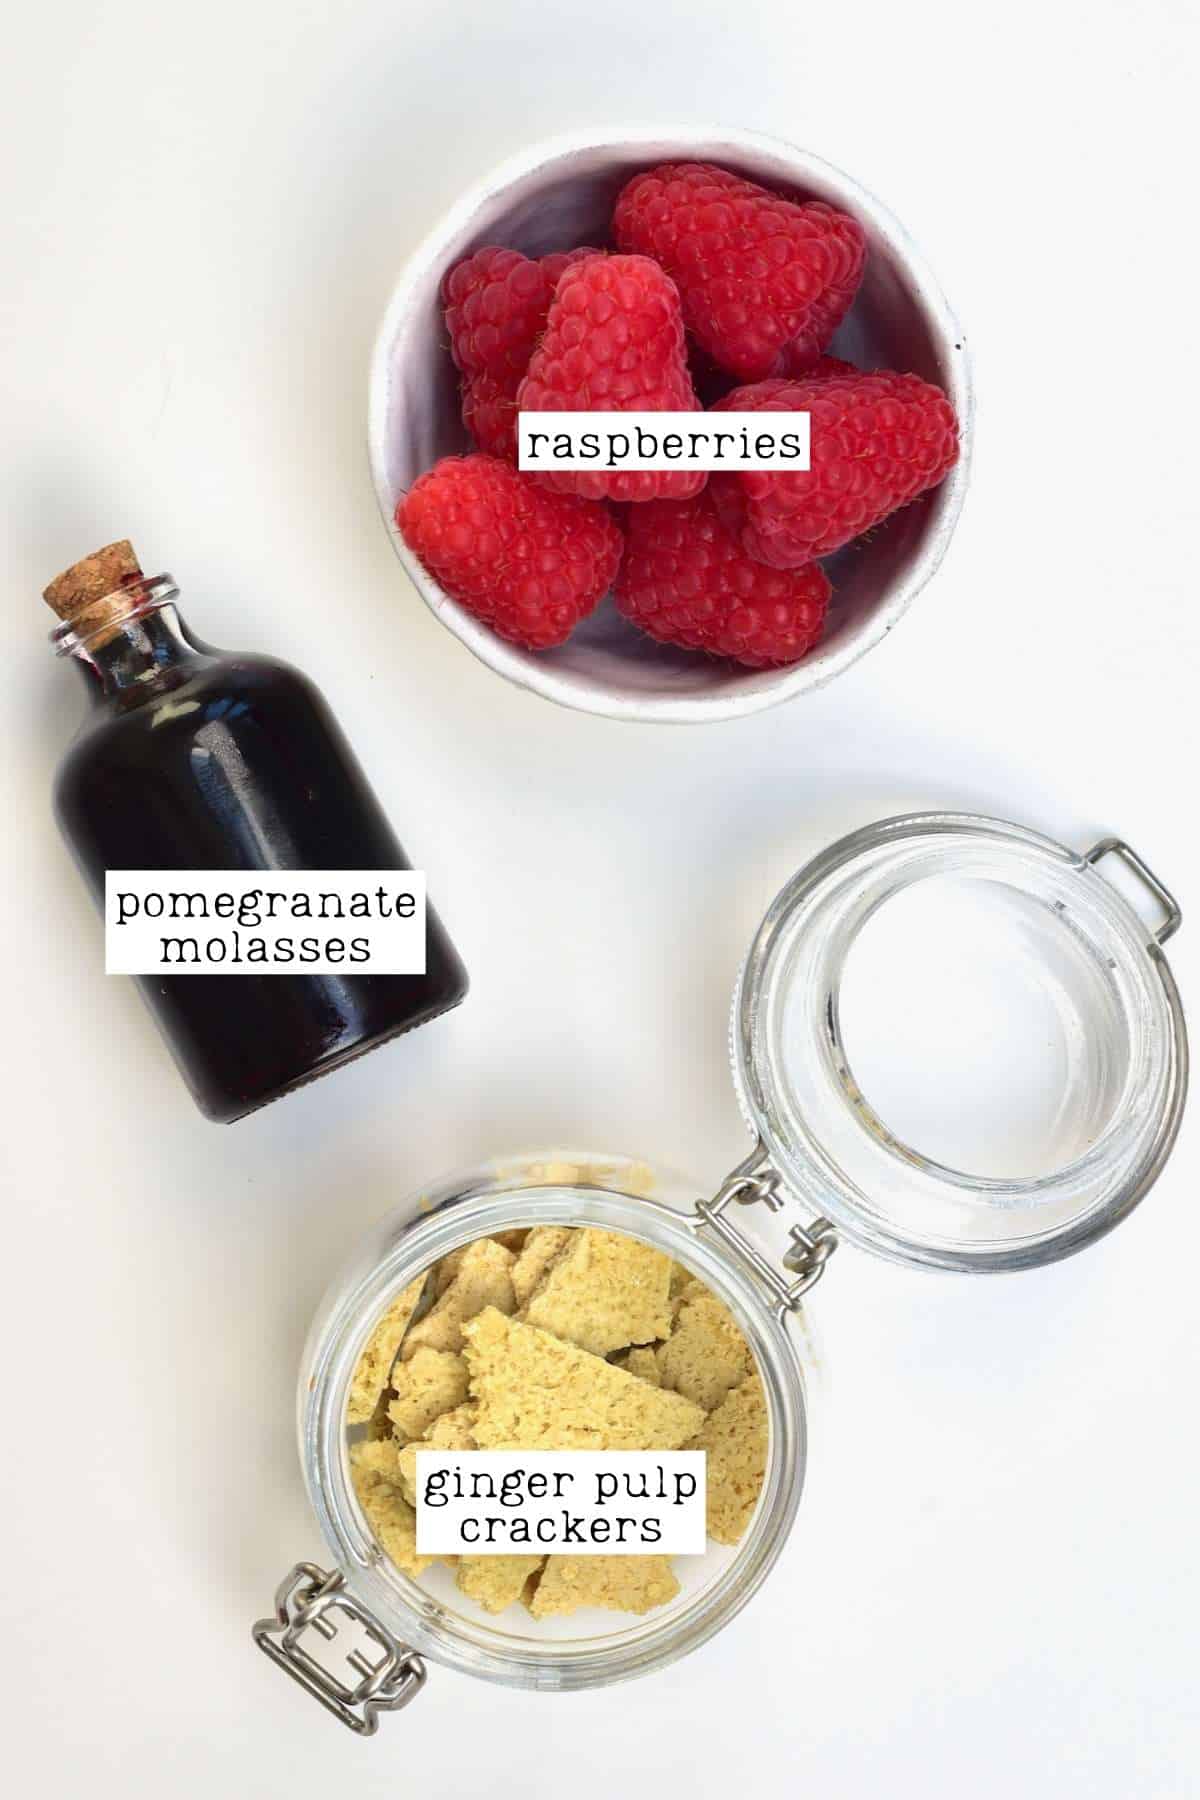 Optional toppings for peach ice cream